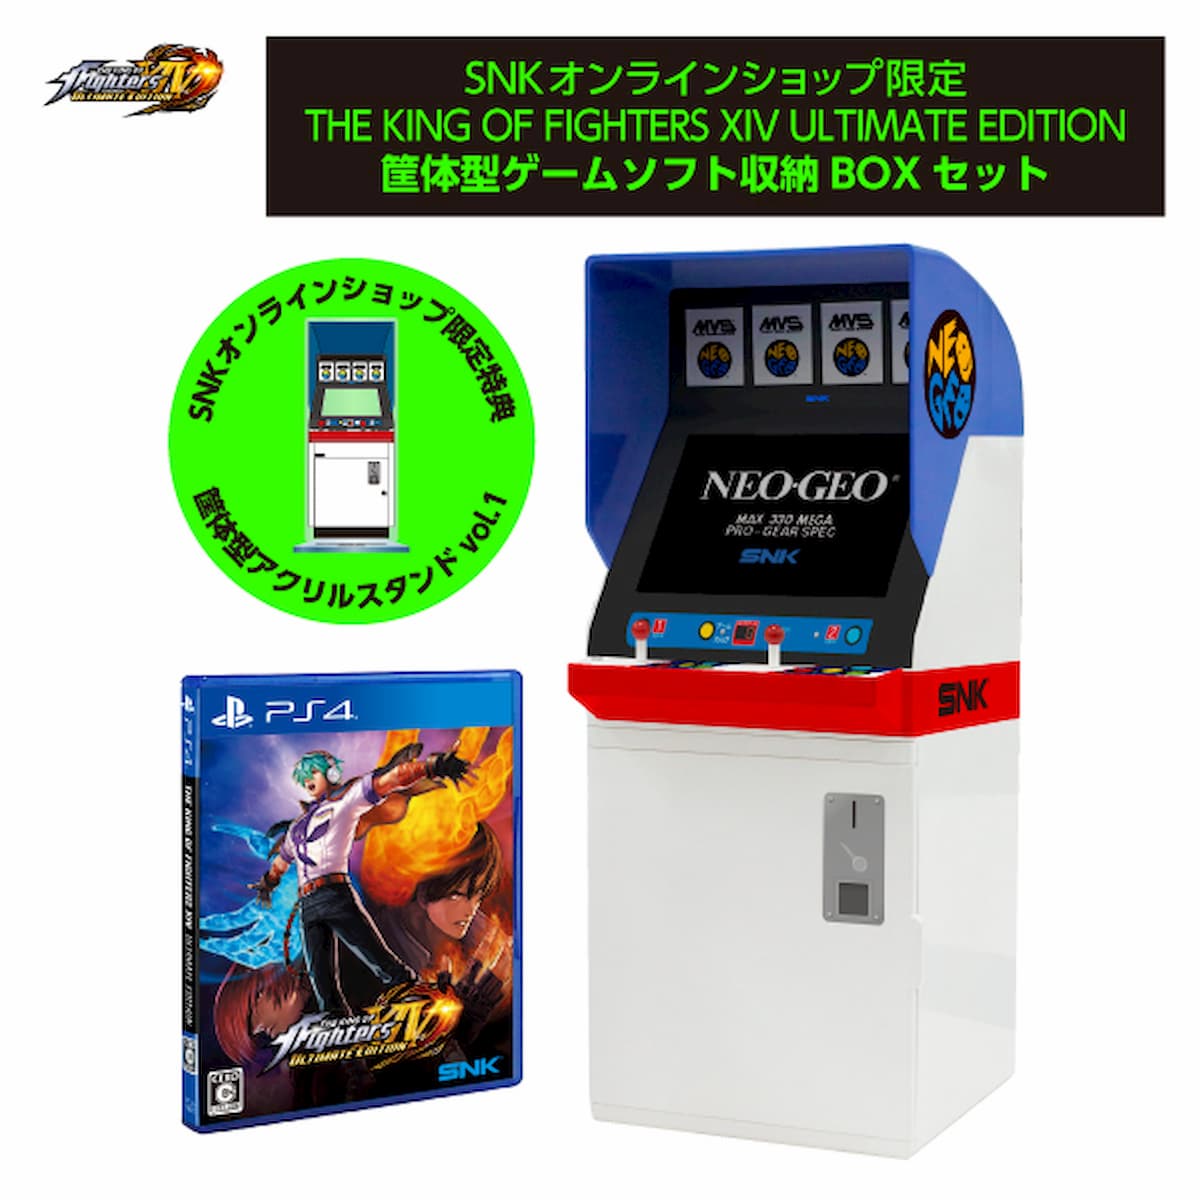 THE KING OF FIGHTERS XIV ULTIMATE EDITION Housing 軟件收納盒套裝--PS4